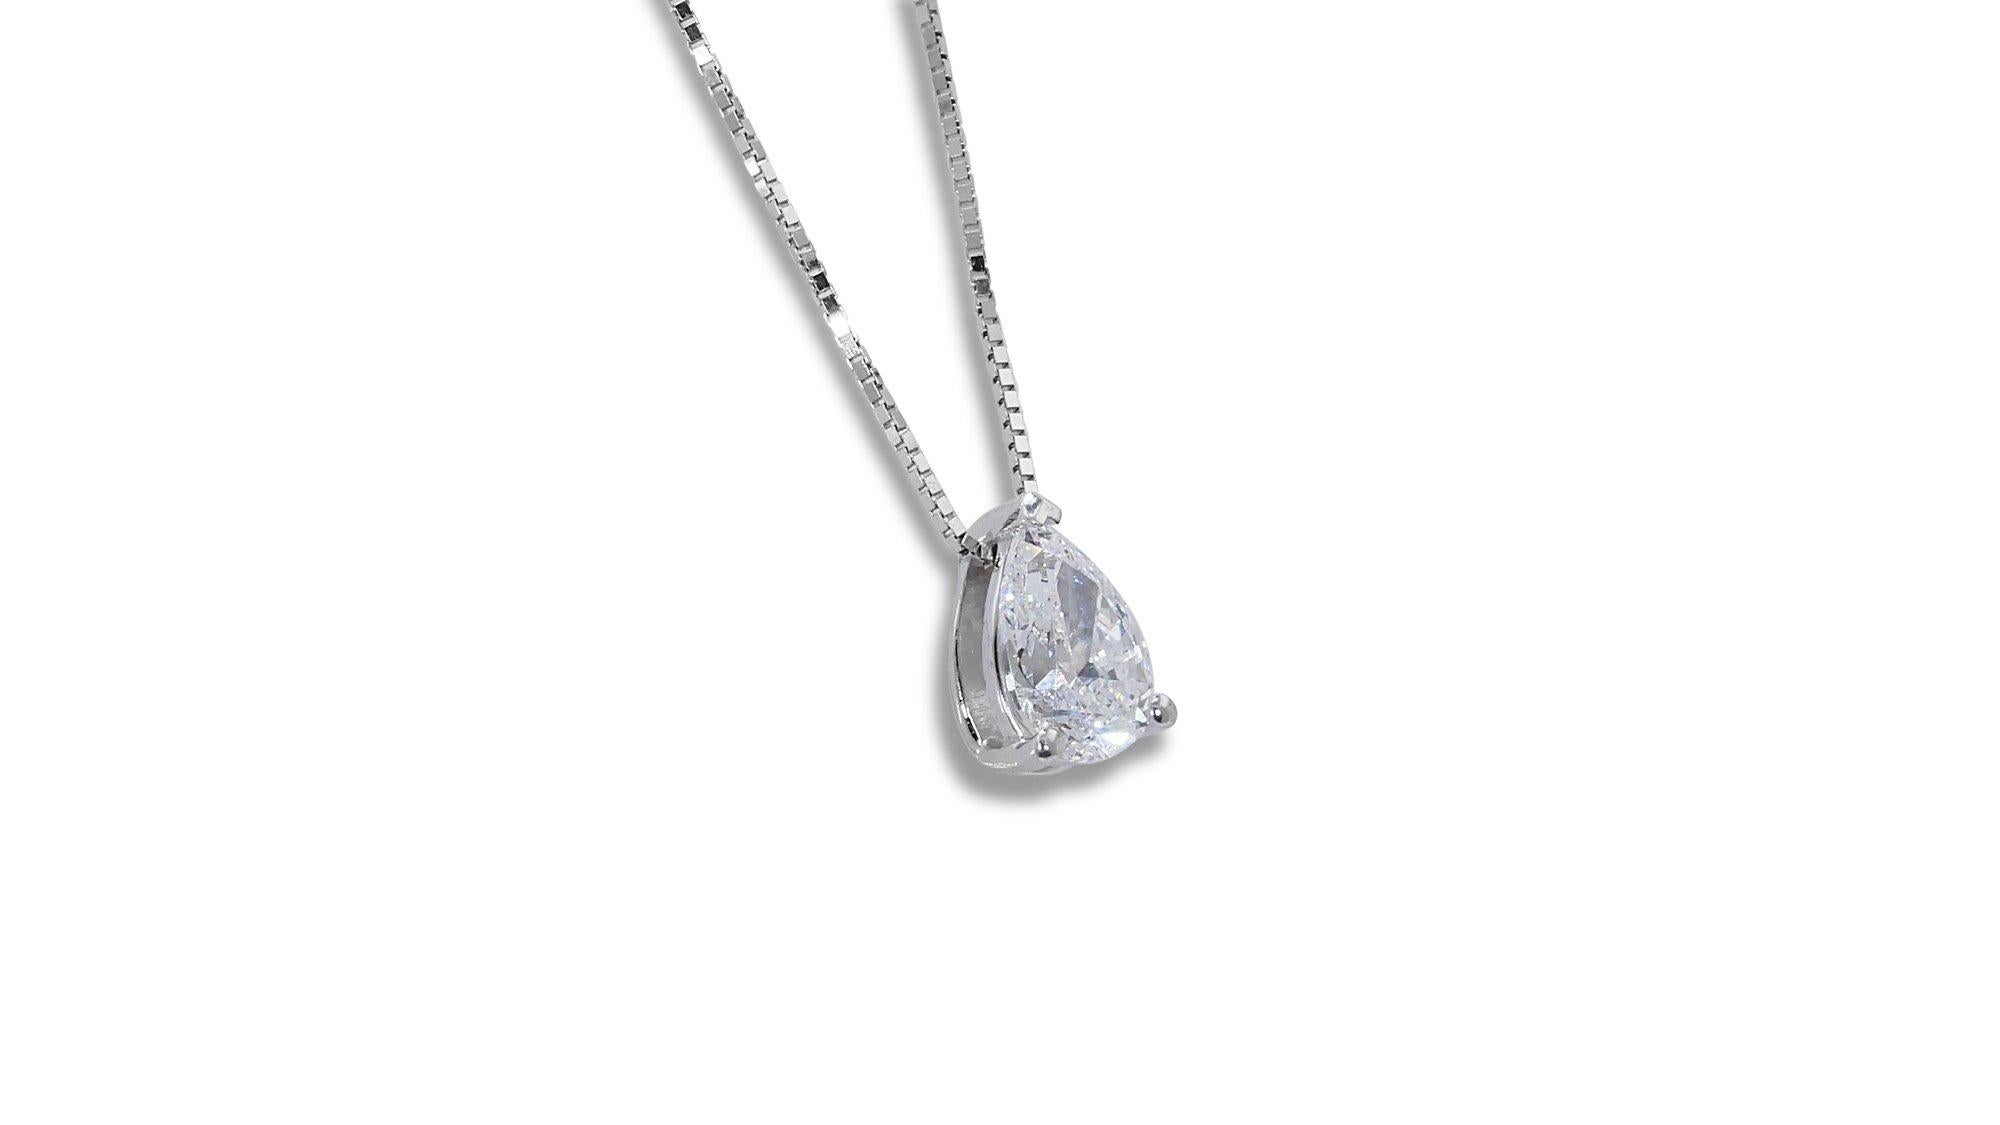 Dazzling 18k White Gold Pendant Necklace with a 0.90 carat brilliant diamond For Sale 1